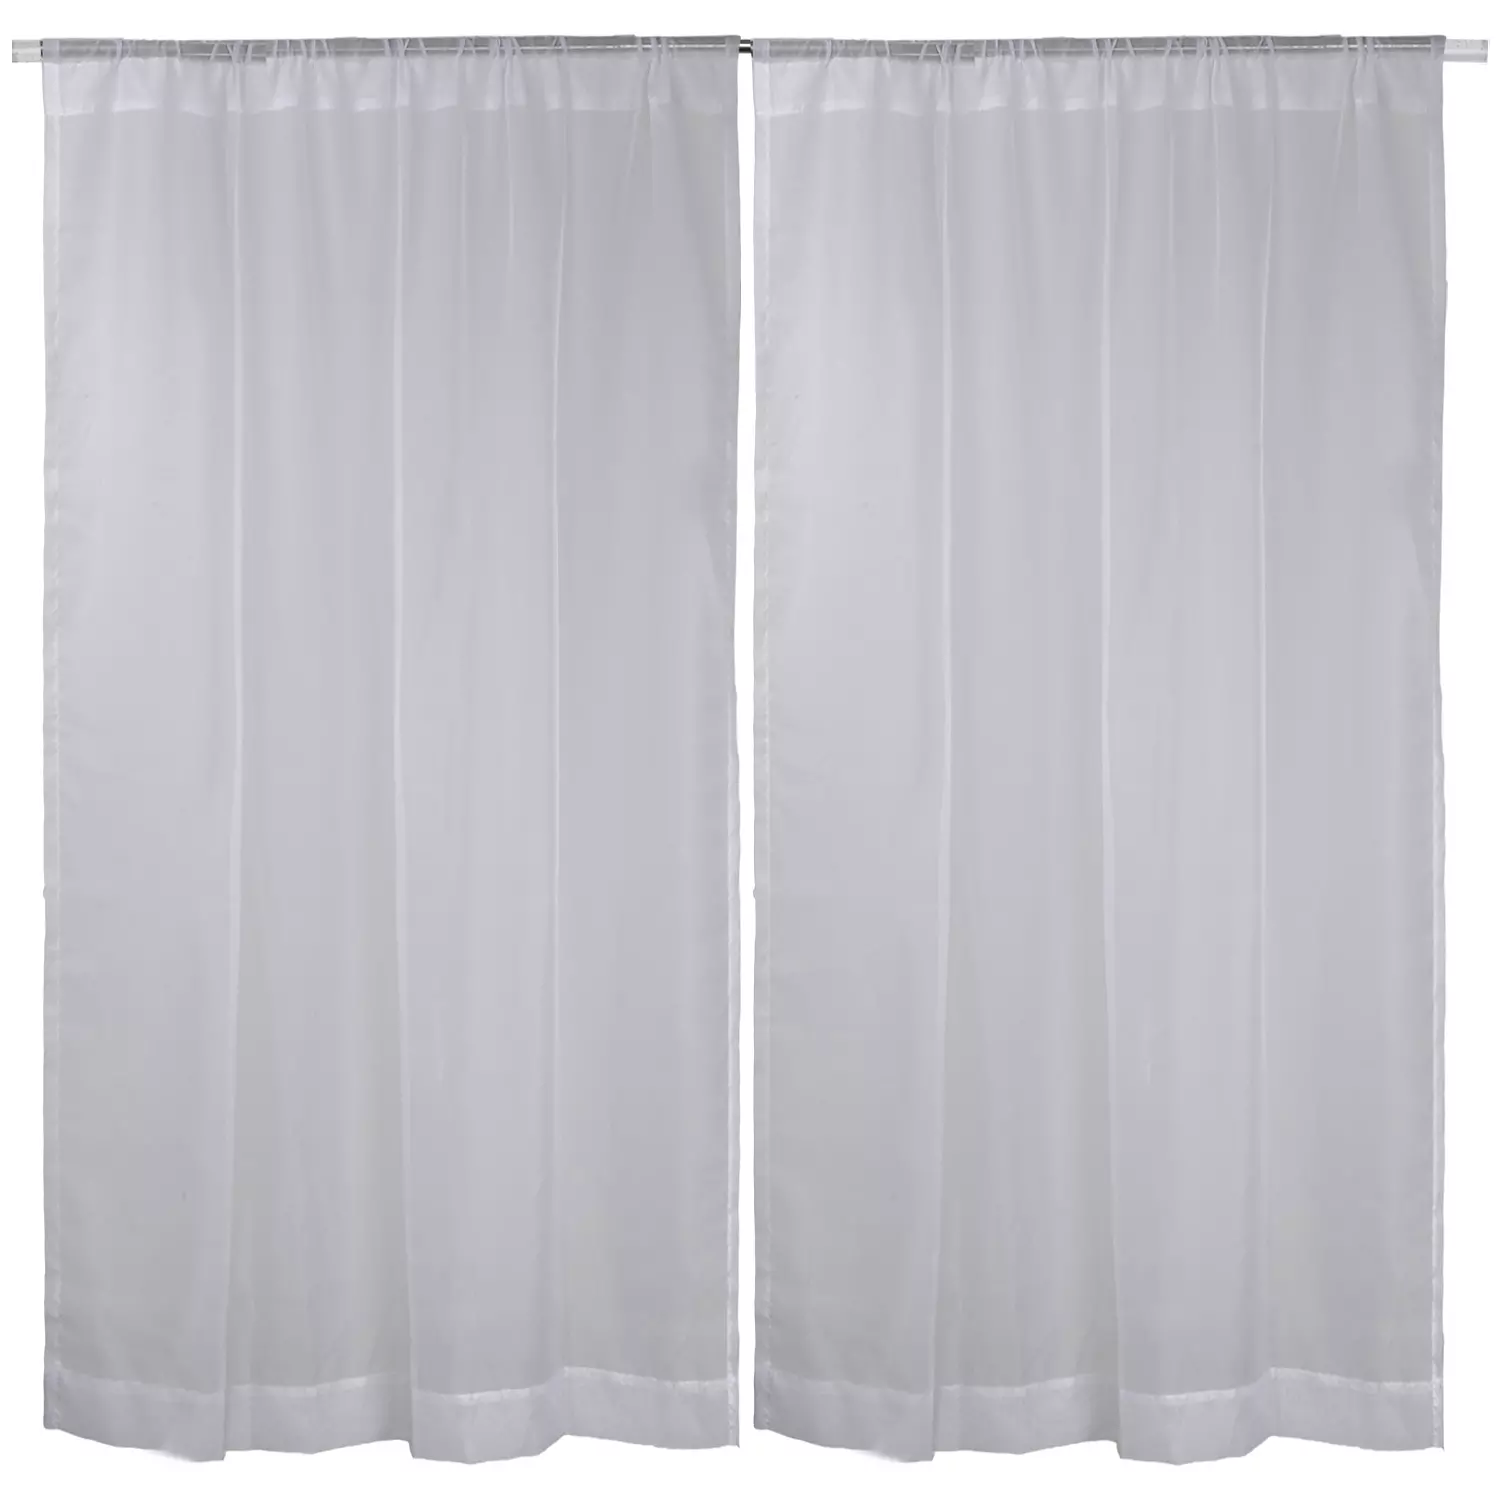 Two semi-sheer voile panels with rod pocket, 54"x84", white